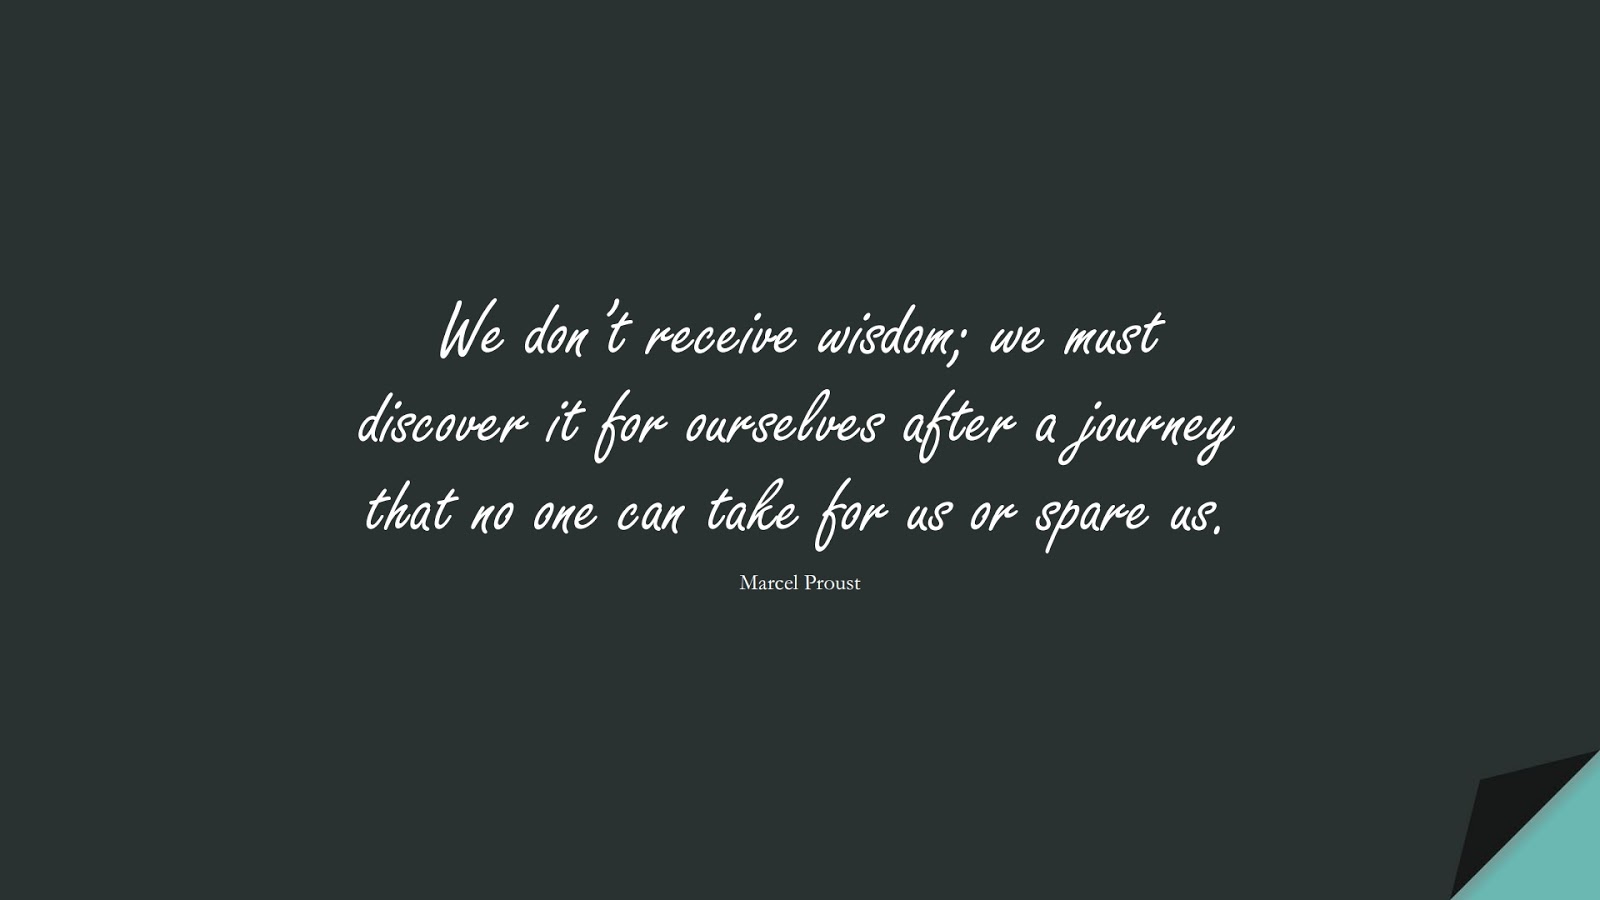 We don’t receive wisdom; we must discover it for ourselves after a journey that no one can take for us or spare us. (Marcel Proust);  #WordsofWisdom